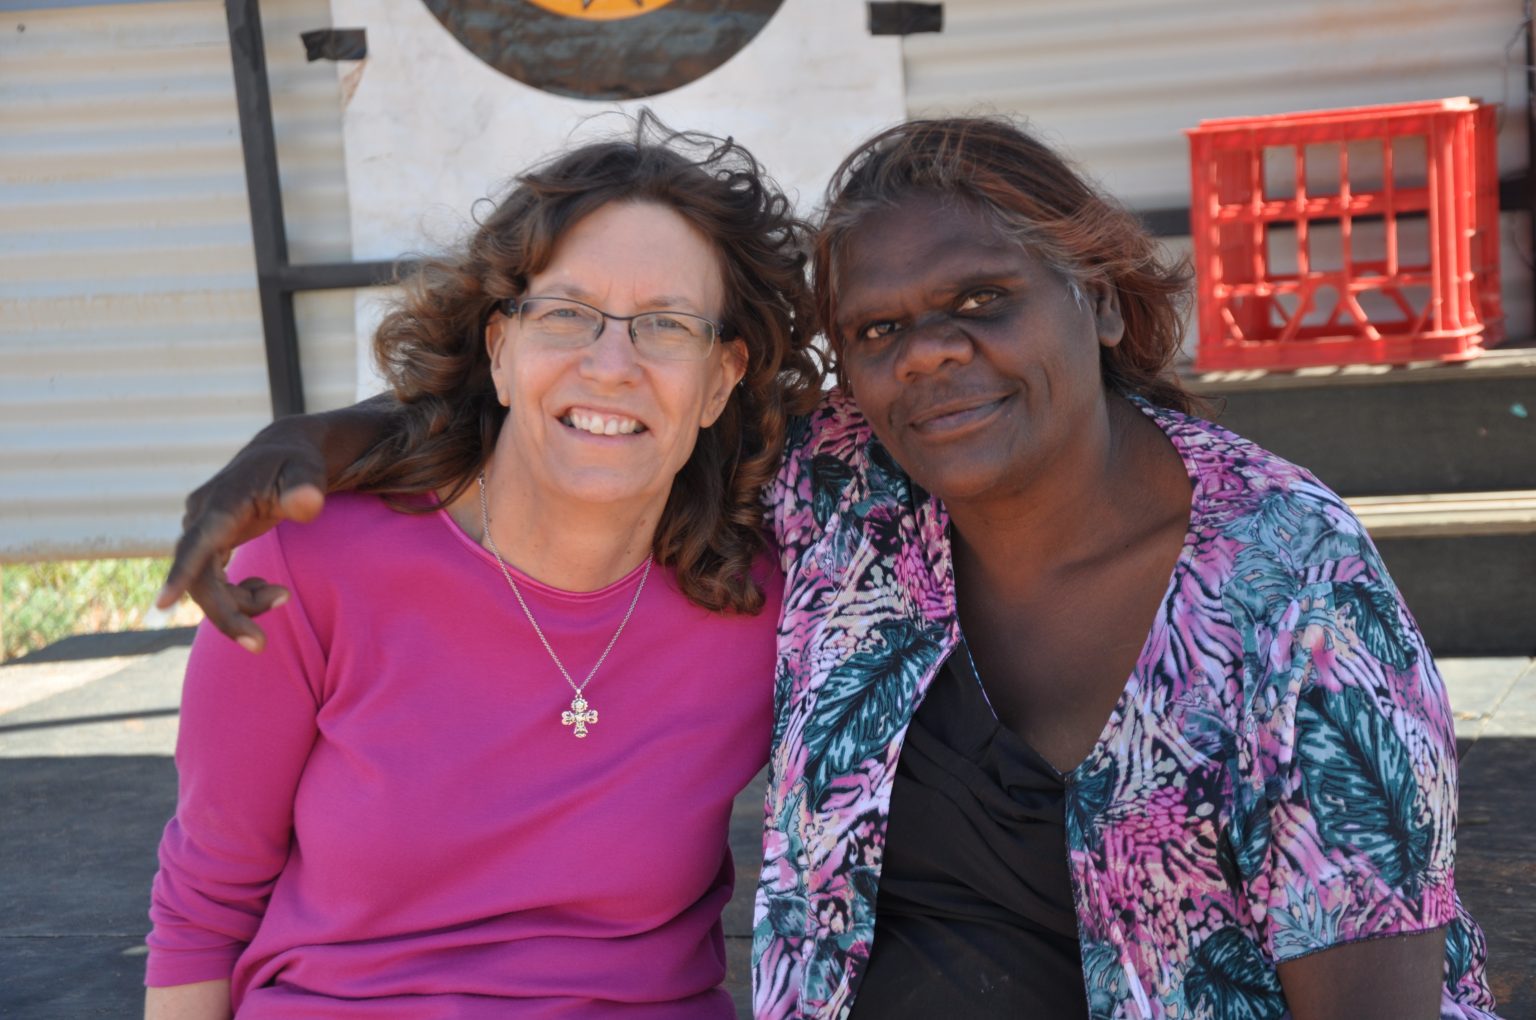 Christmas in Oodnadatta - We are all in this together - Frontier Services